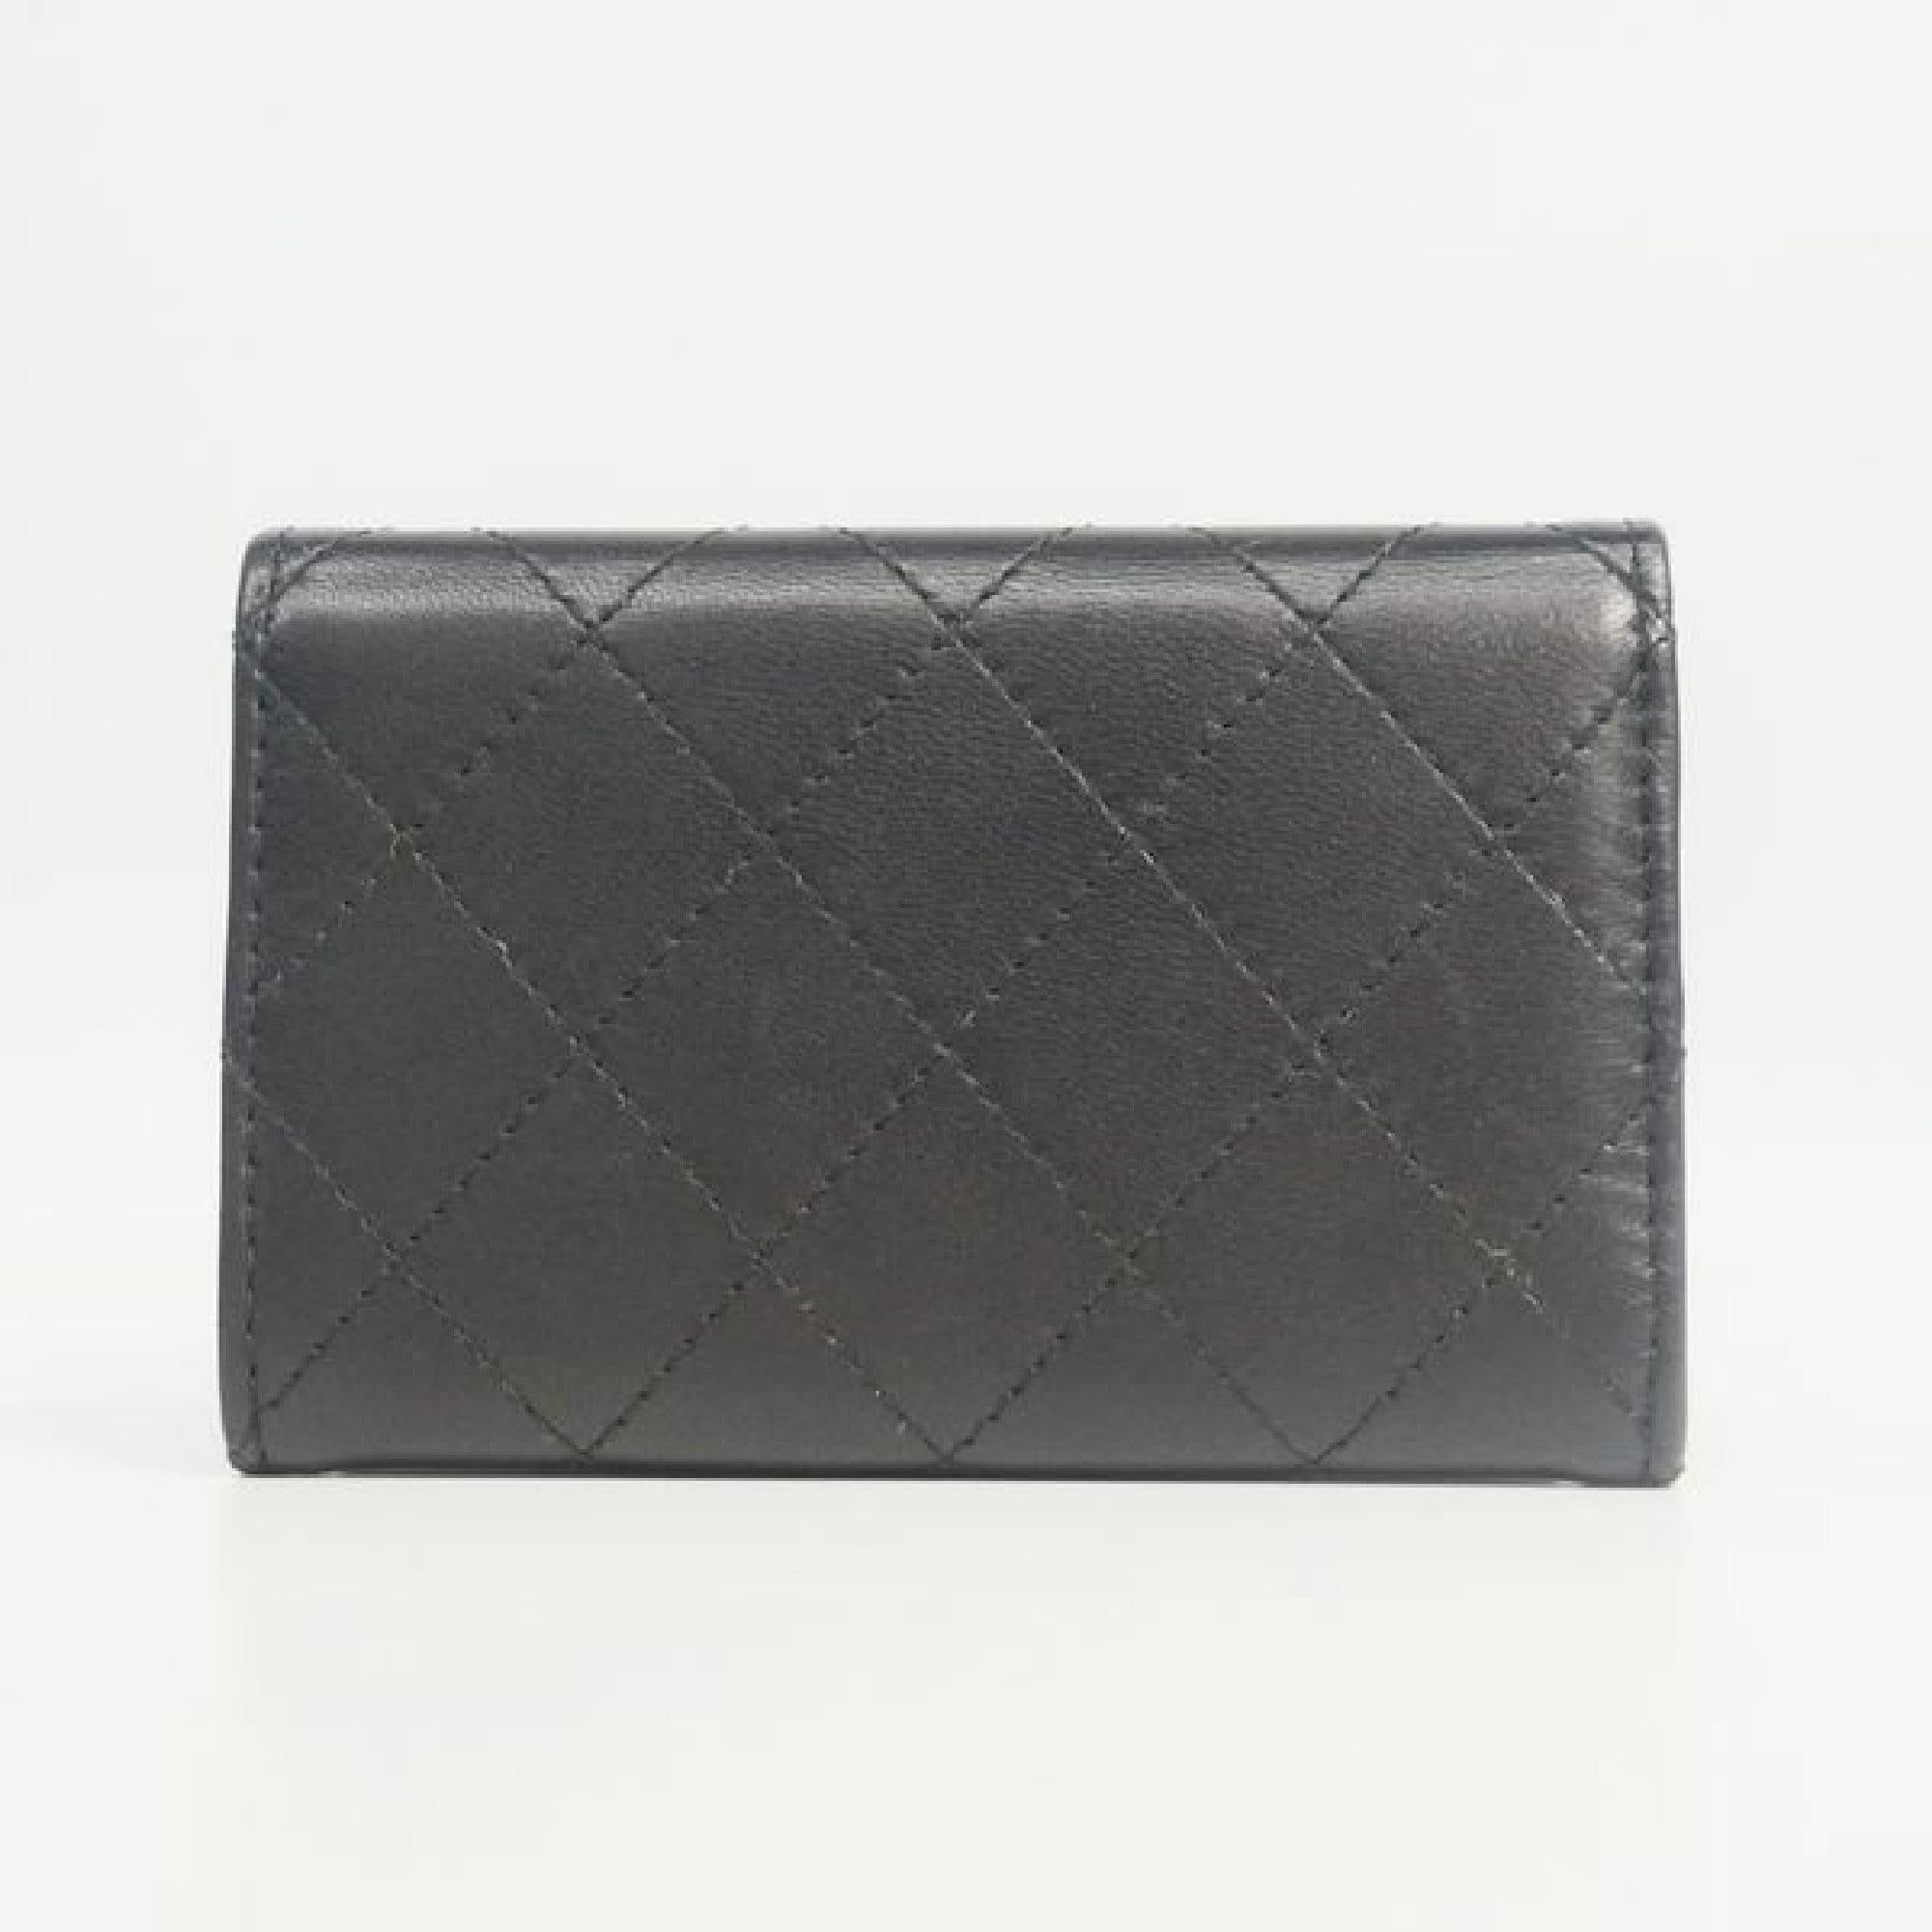 An authentic CHANEL card case matelasse coco mark Womens Pass Case black. The color is Black. The outside material is Leather. The pattern is matelasse  coco mark. This item is Contemporary. The year of manufacture would be 2018.
Rank
Same as S new